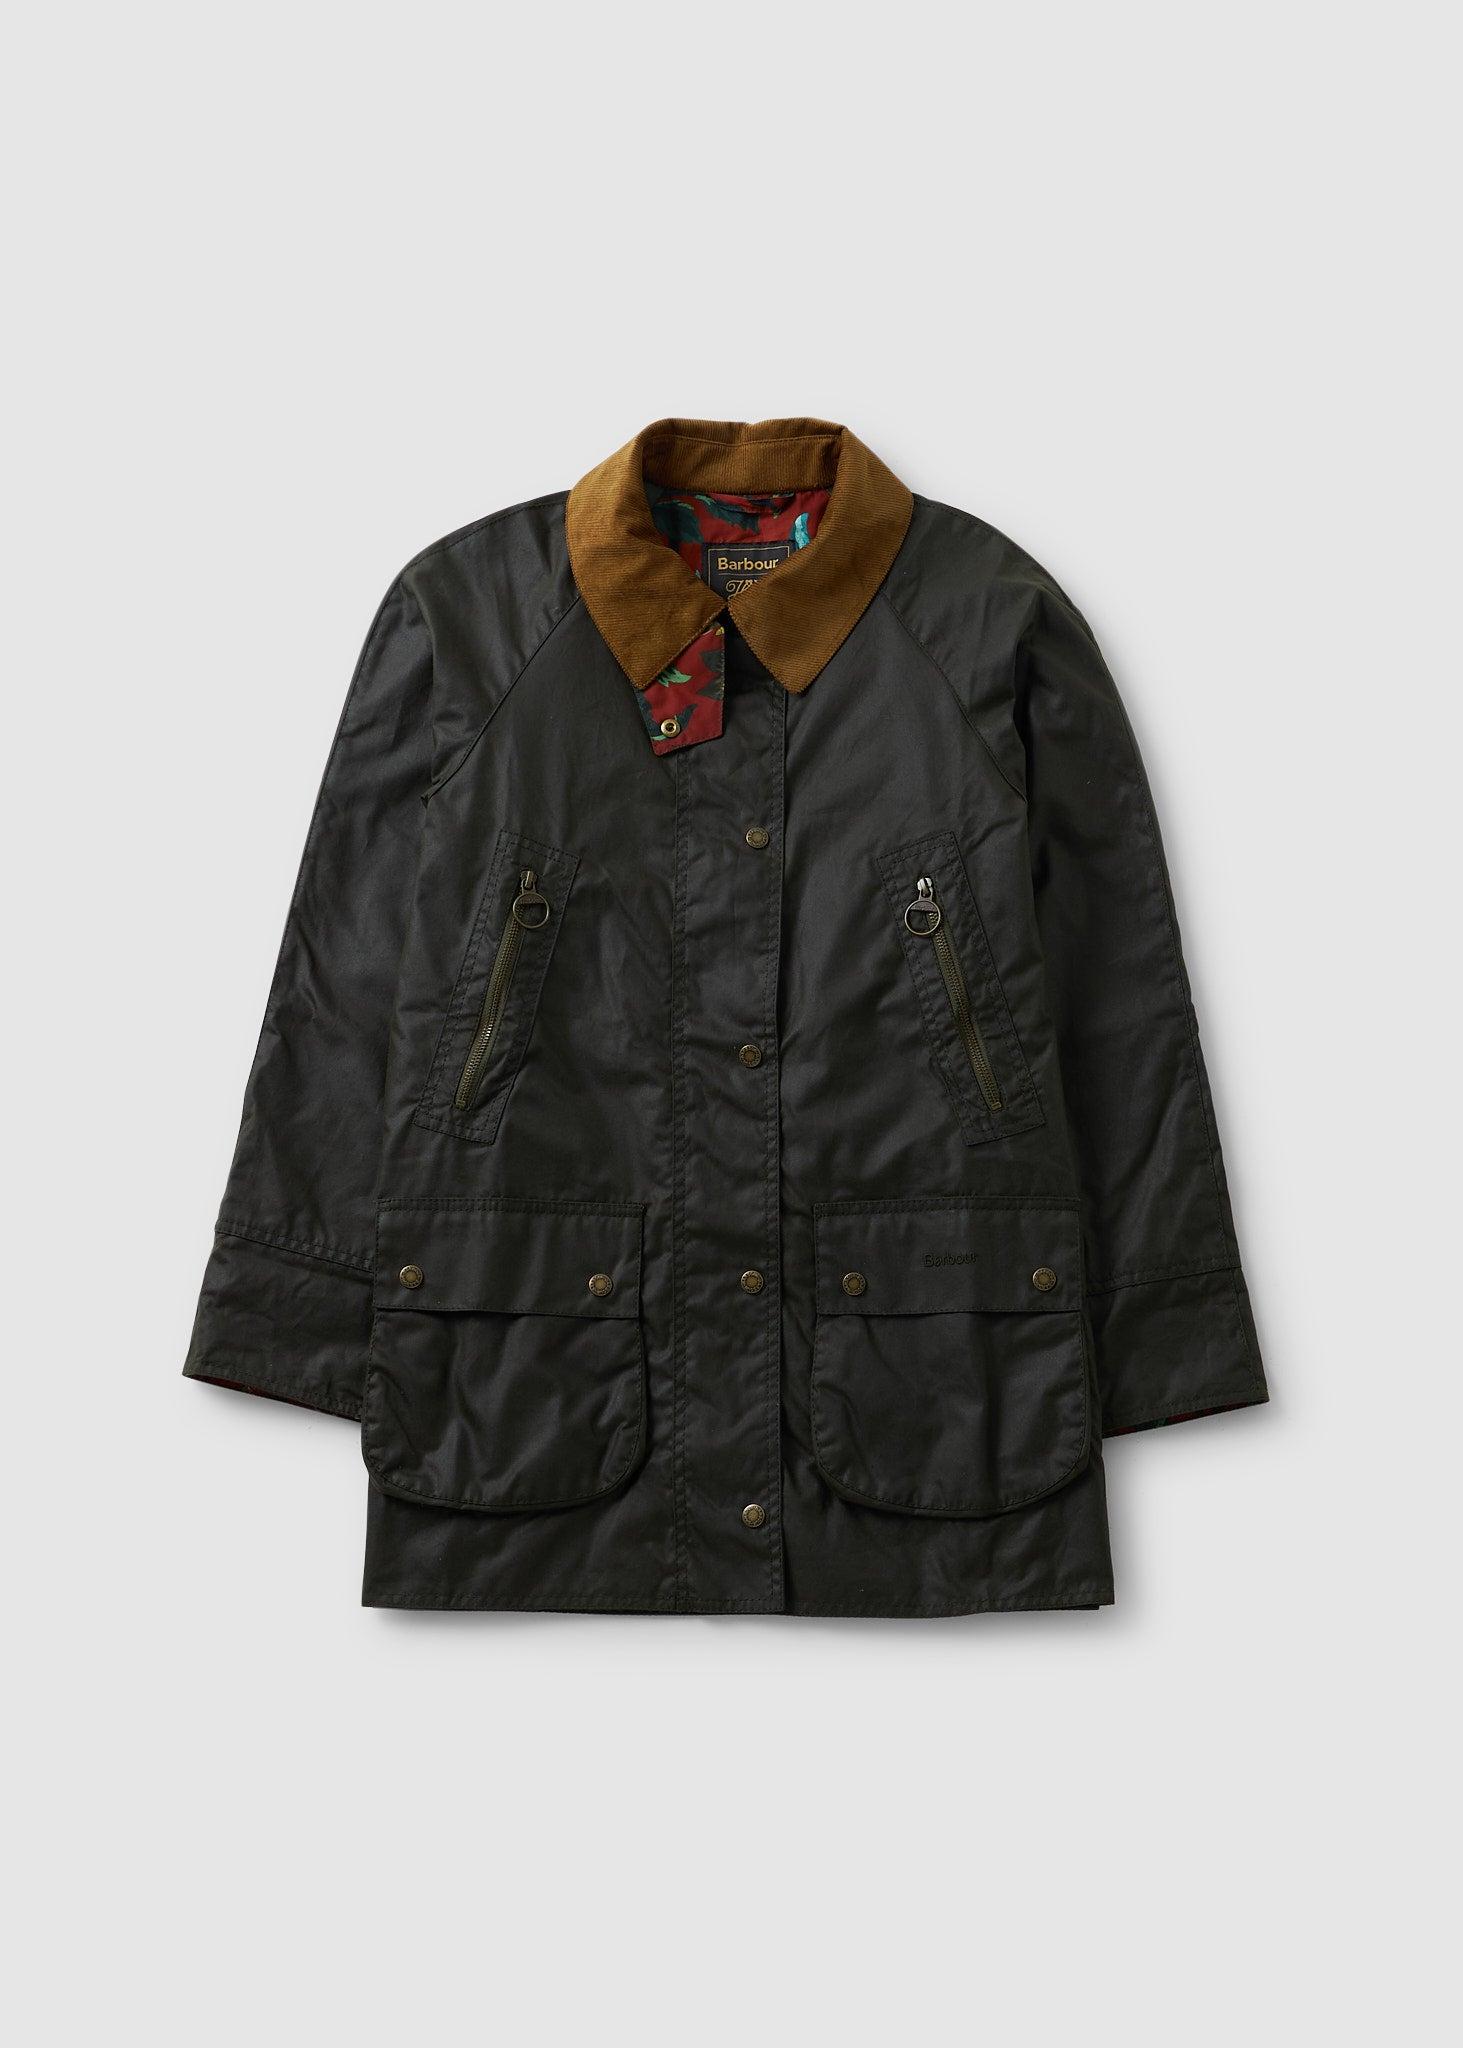 Barbour Hoh Mabley Wax Jacket With Floral Lining in Black | Lyst